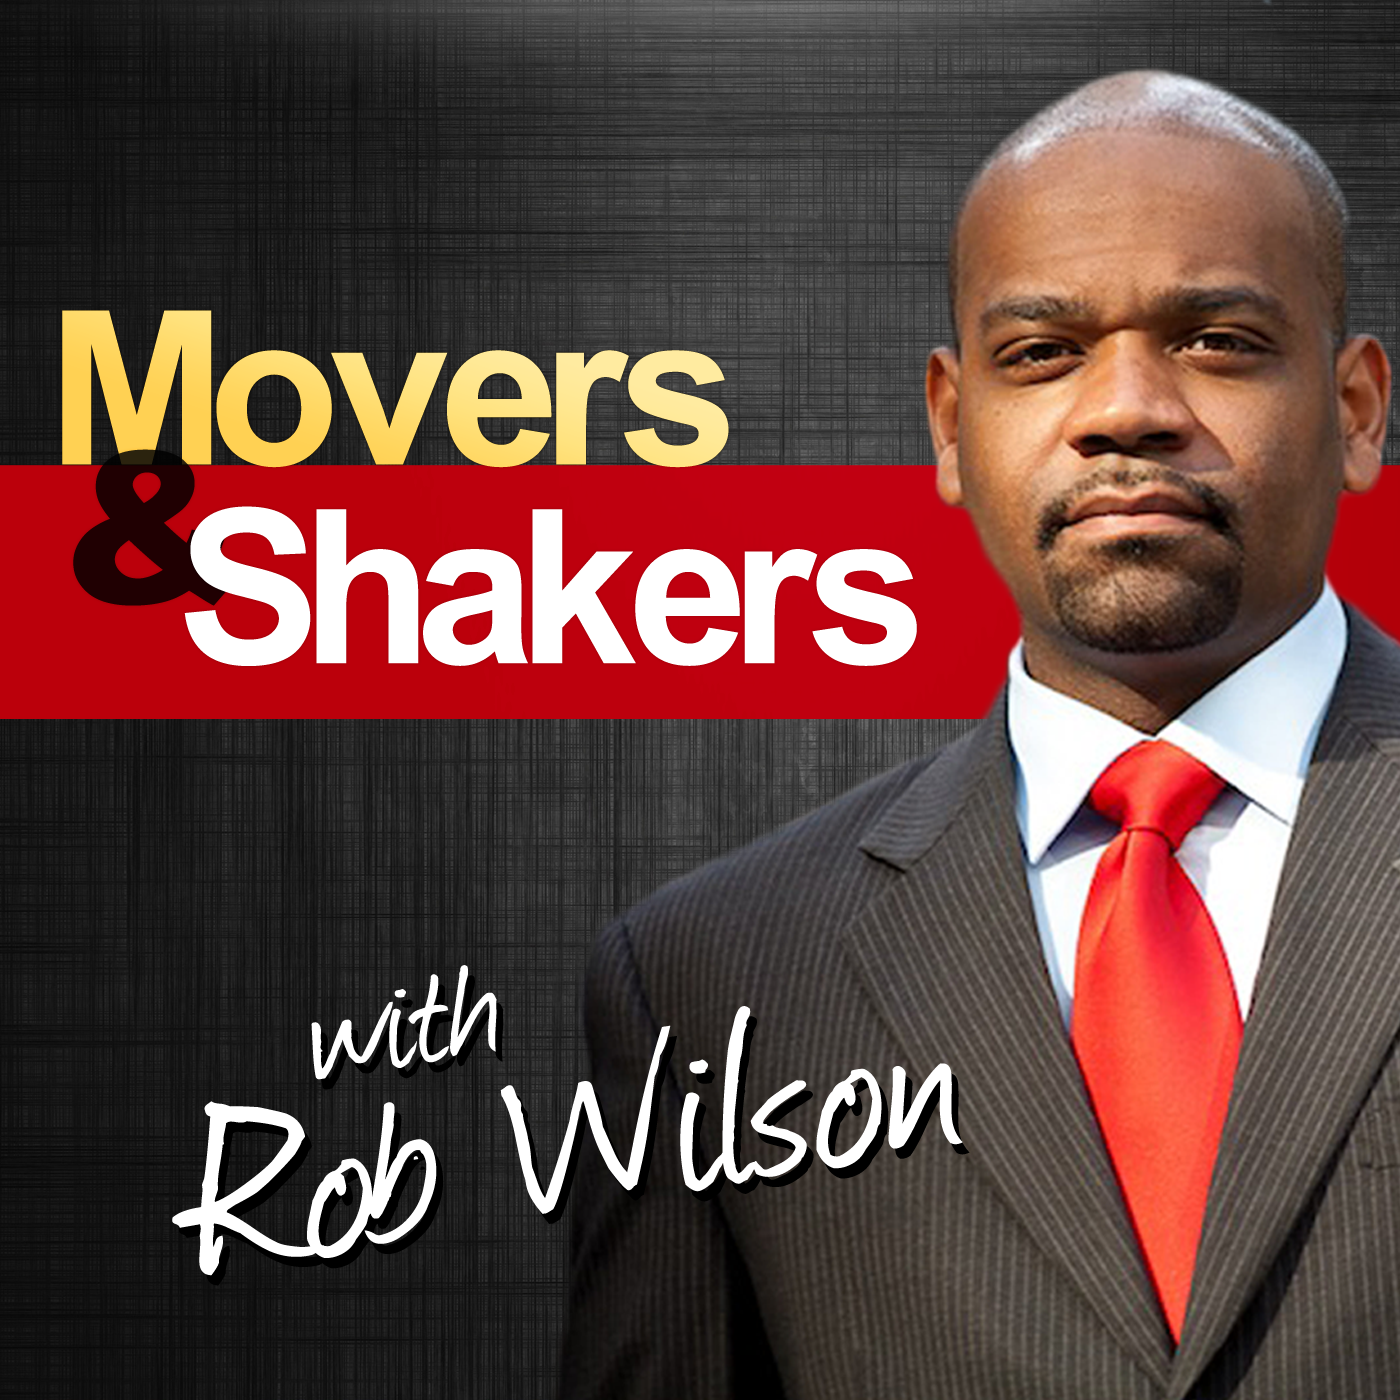 The Movers & Shakers Podcast with Rob Wilson